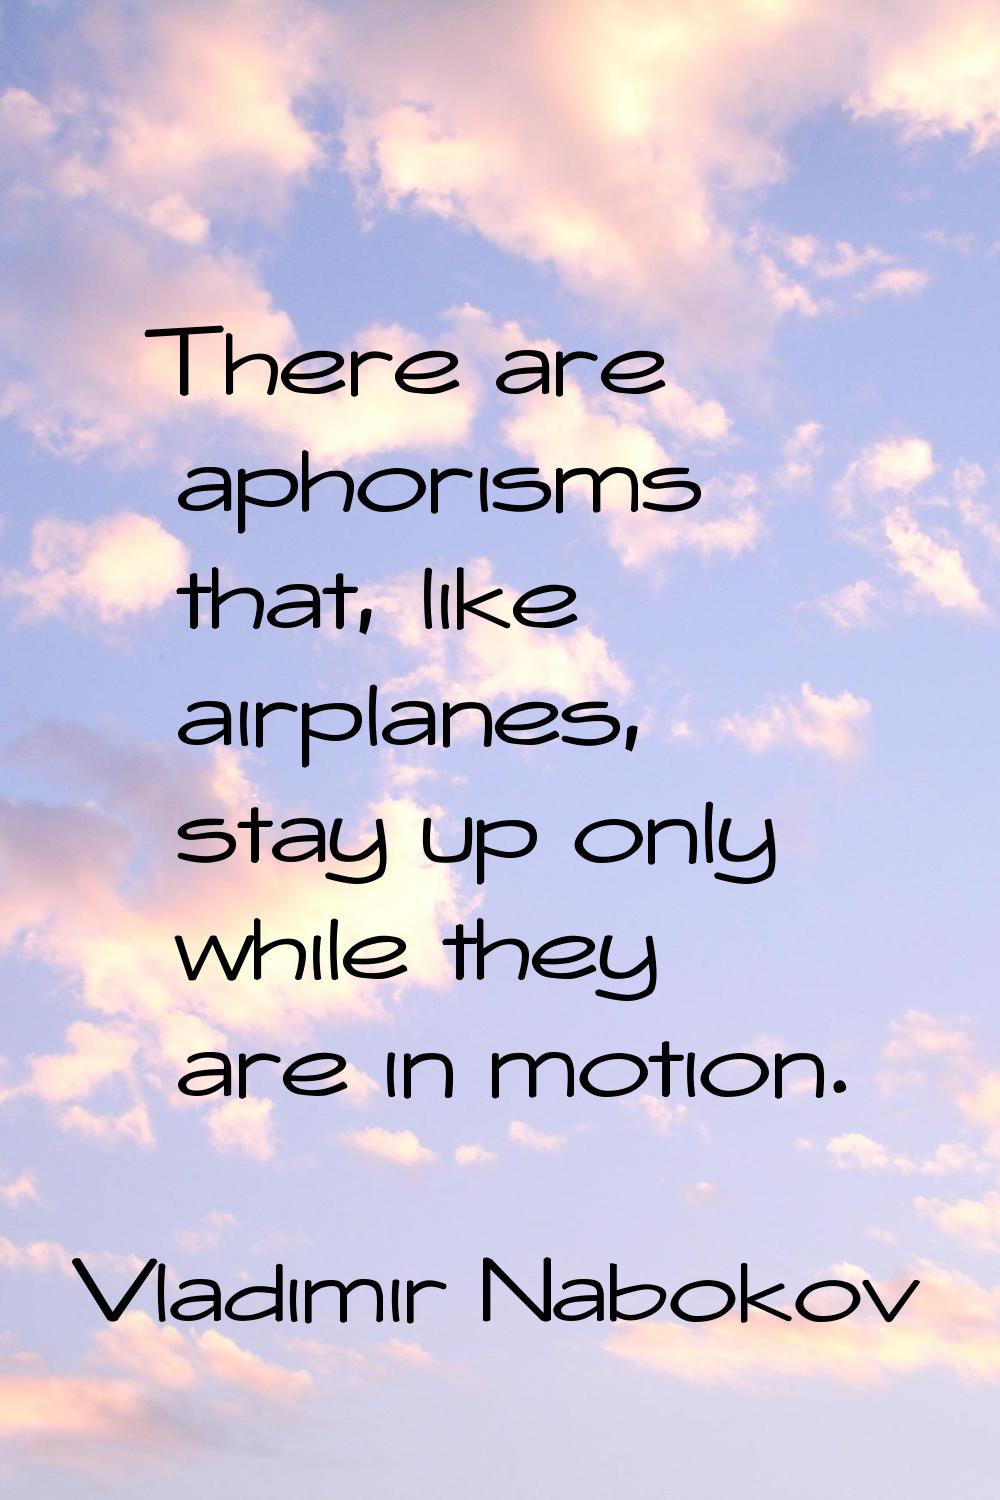 There are aphorisms that, like airplanes, stay up only while they are in motion.